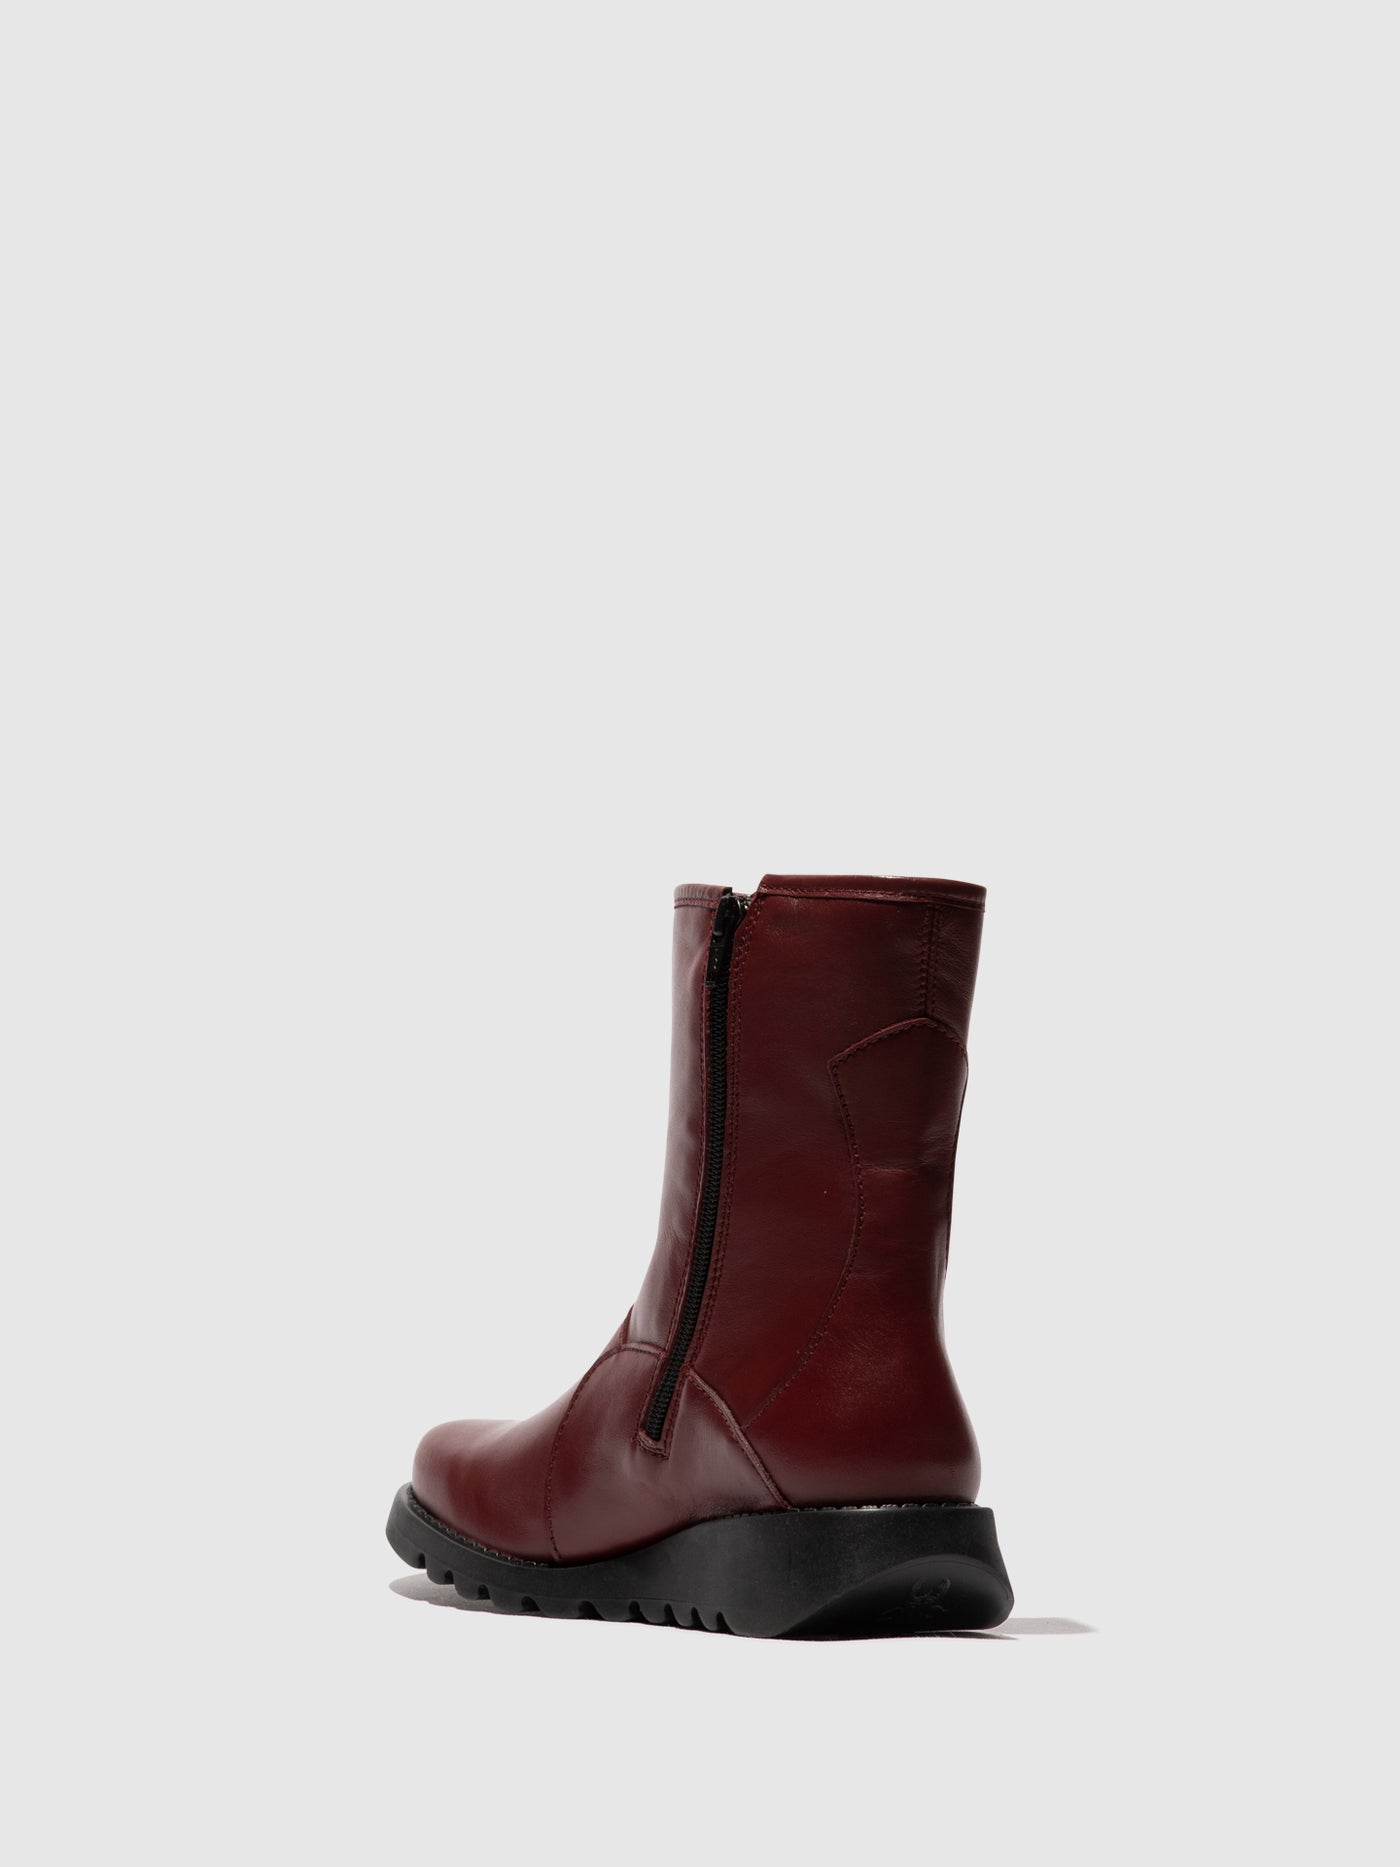 Buckle Ankle Boots SABE013FLY WINE